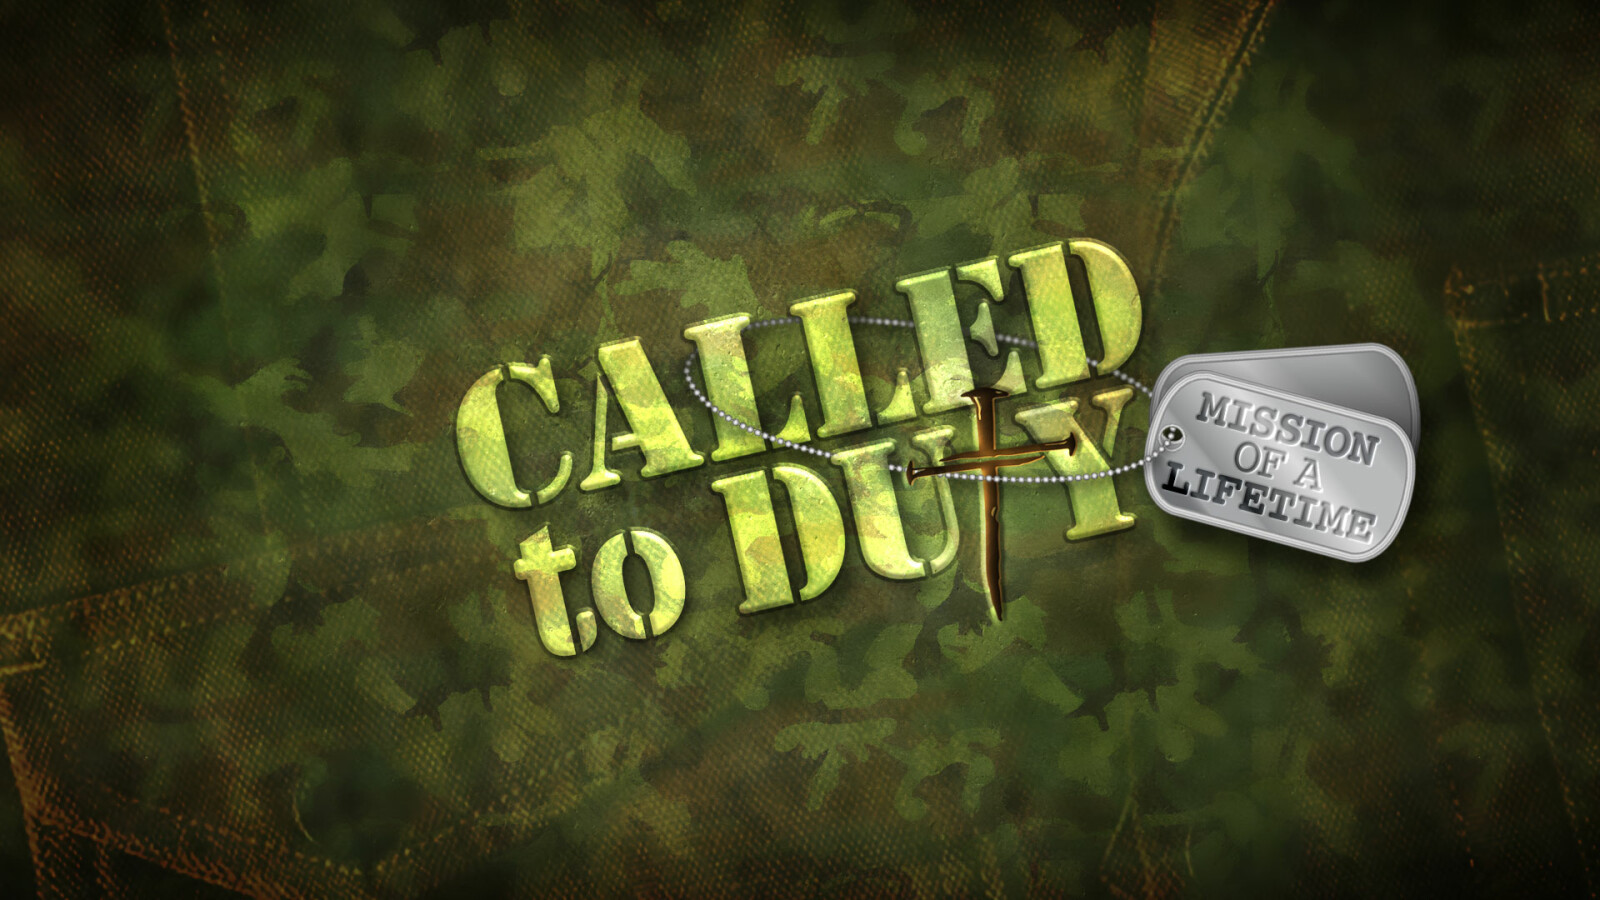 Called to Duty